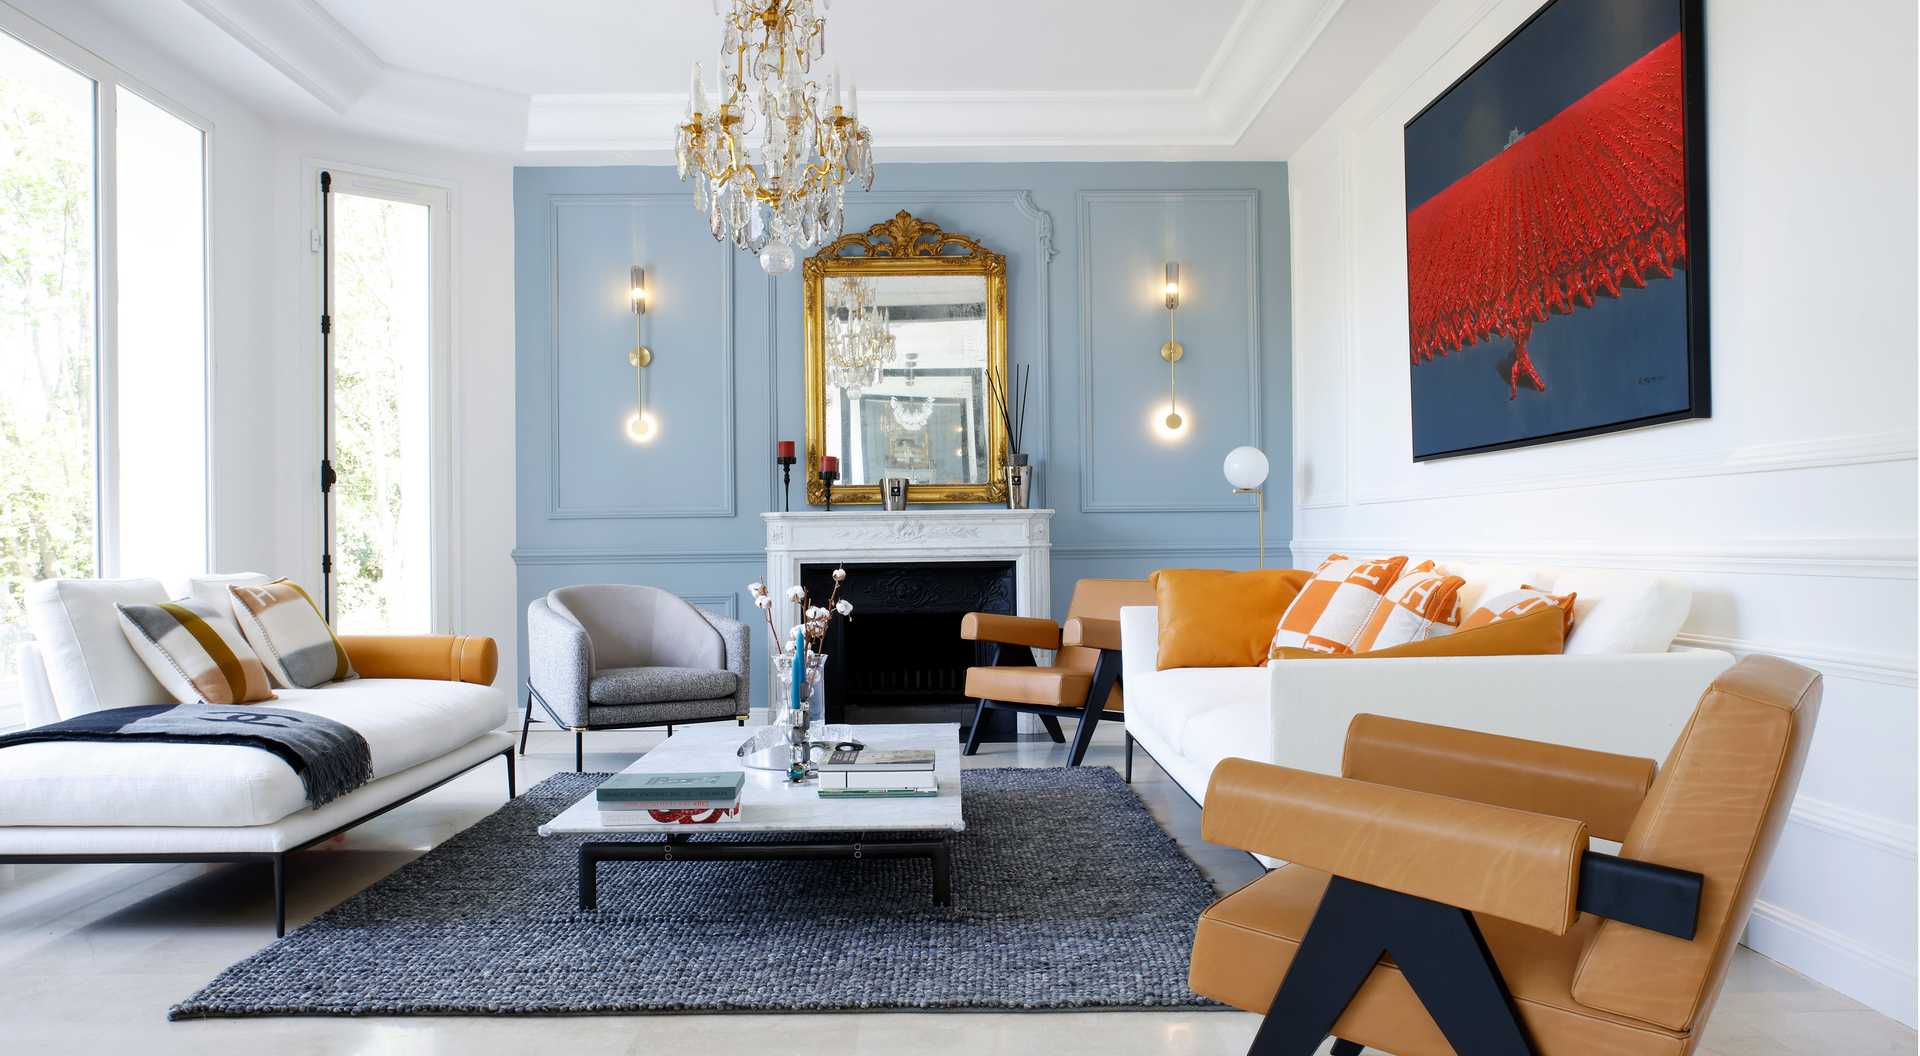 Interior makeover of an apartment by an interior designer in Brussels